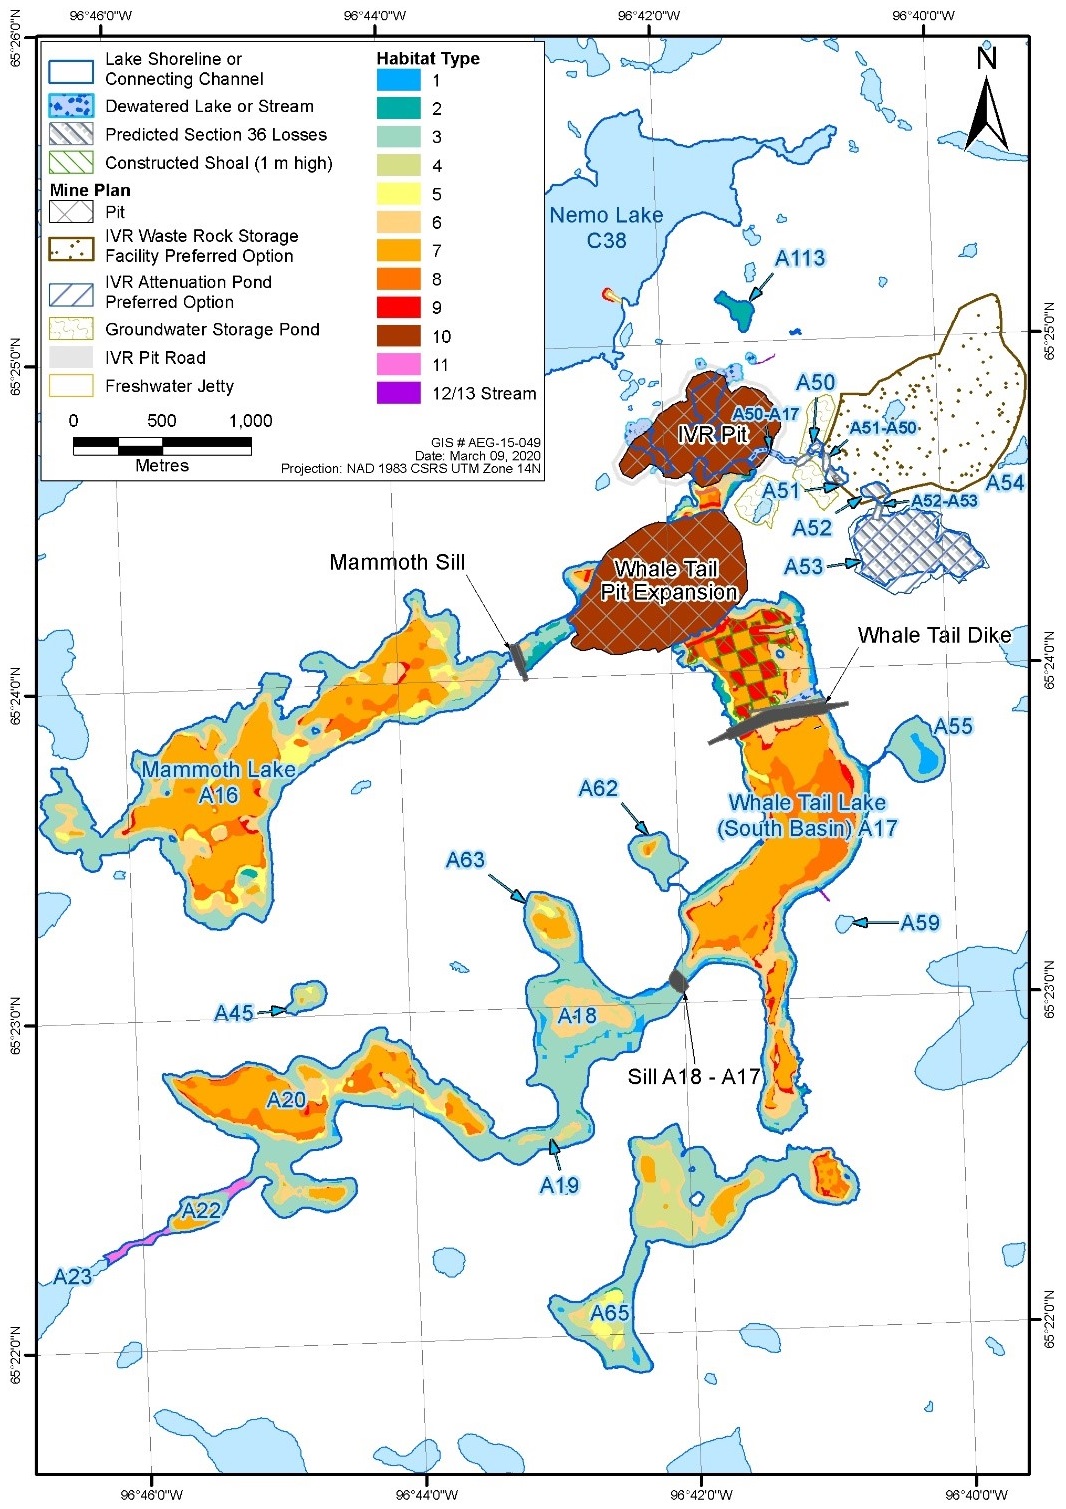 The location of the sill at the project site in Nunavut as part of the plan to offset the loss of fish habitat - Description below